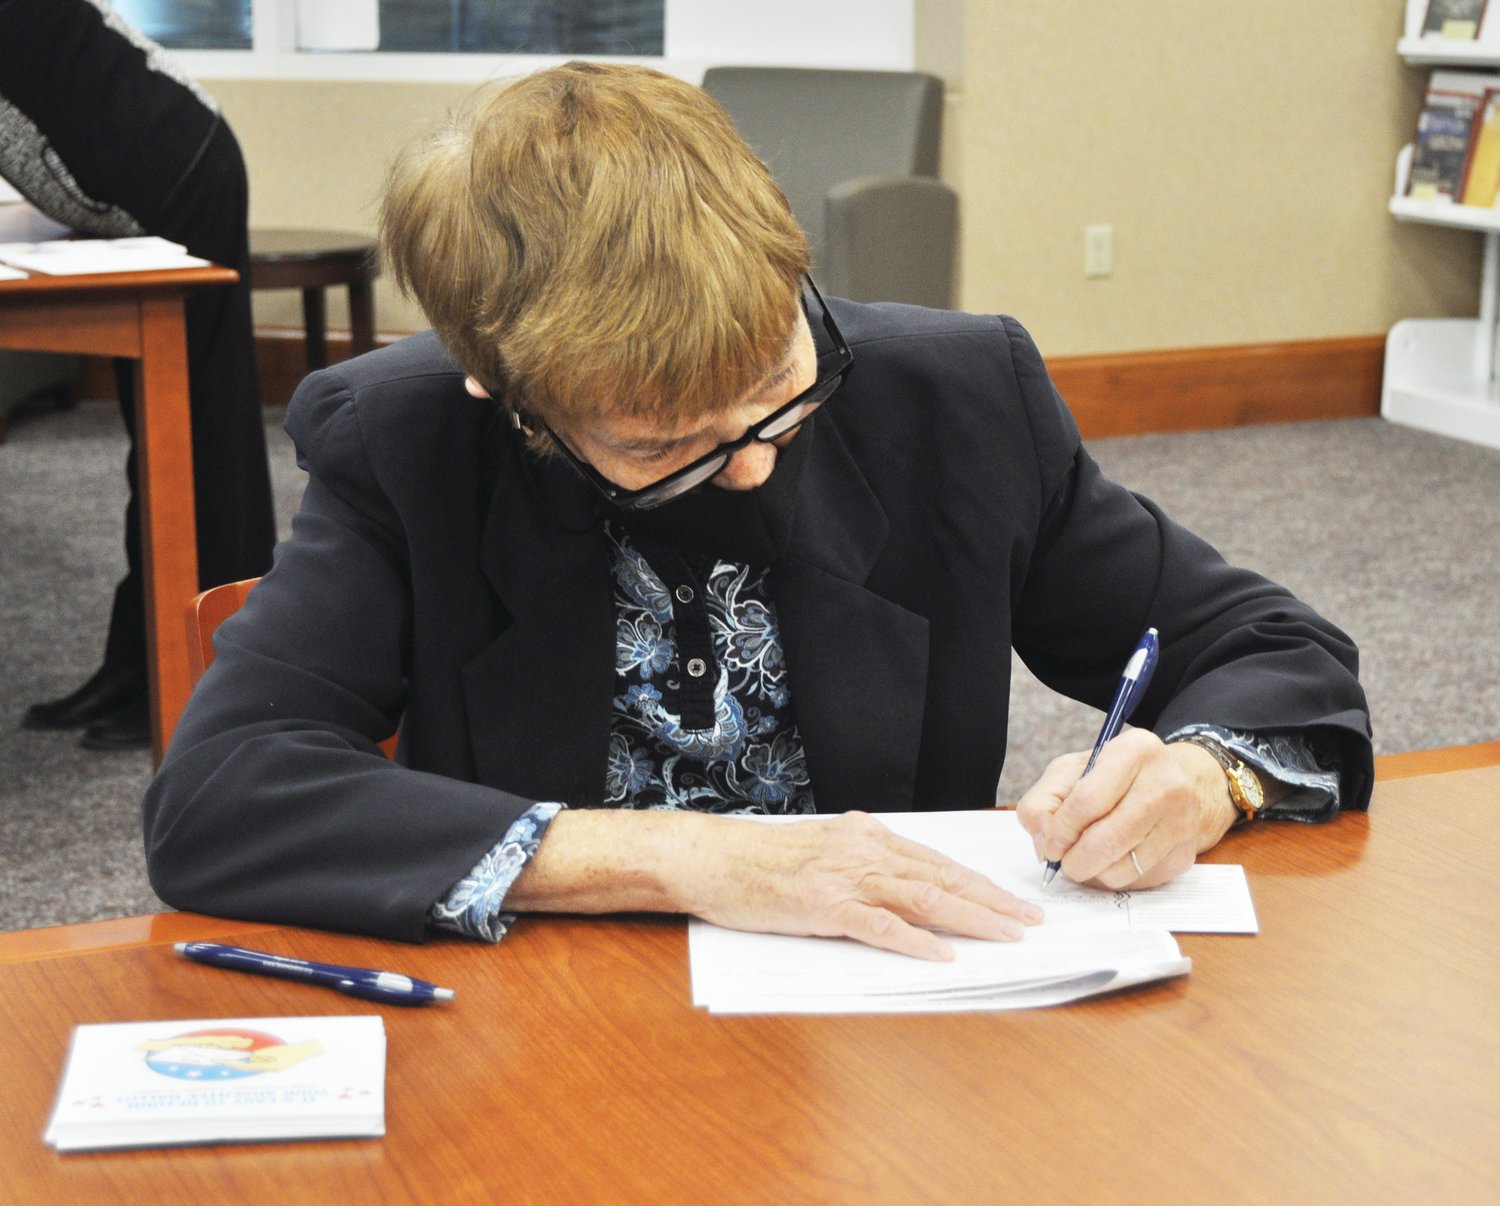 League of Women Voters member Gail Pebworth checks off an address from a list of absentee voters Wednesday at the Crawfordsville District Public Library. The League received permission from the Montgomery County Clerk's Office to send out postcards reminding voters to mail in their absentee ballots. Absentee ballots must be returned to the clerk's office by noon on Election Day Nov. 3. More than 7,000 of the county's 25,406 registered voters have voted early, according to the clerk's office.